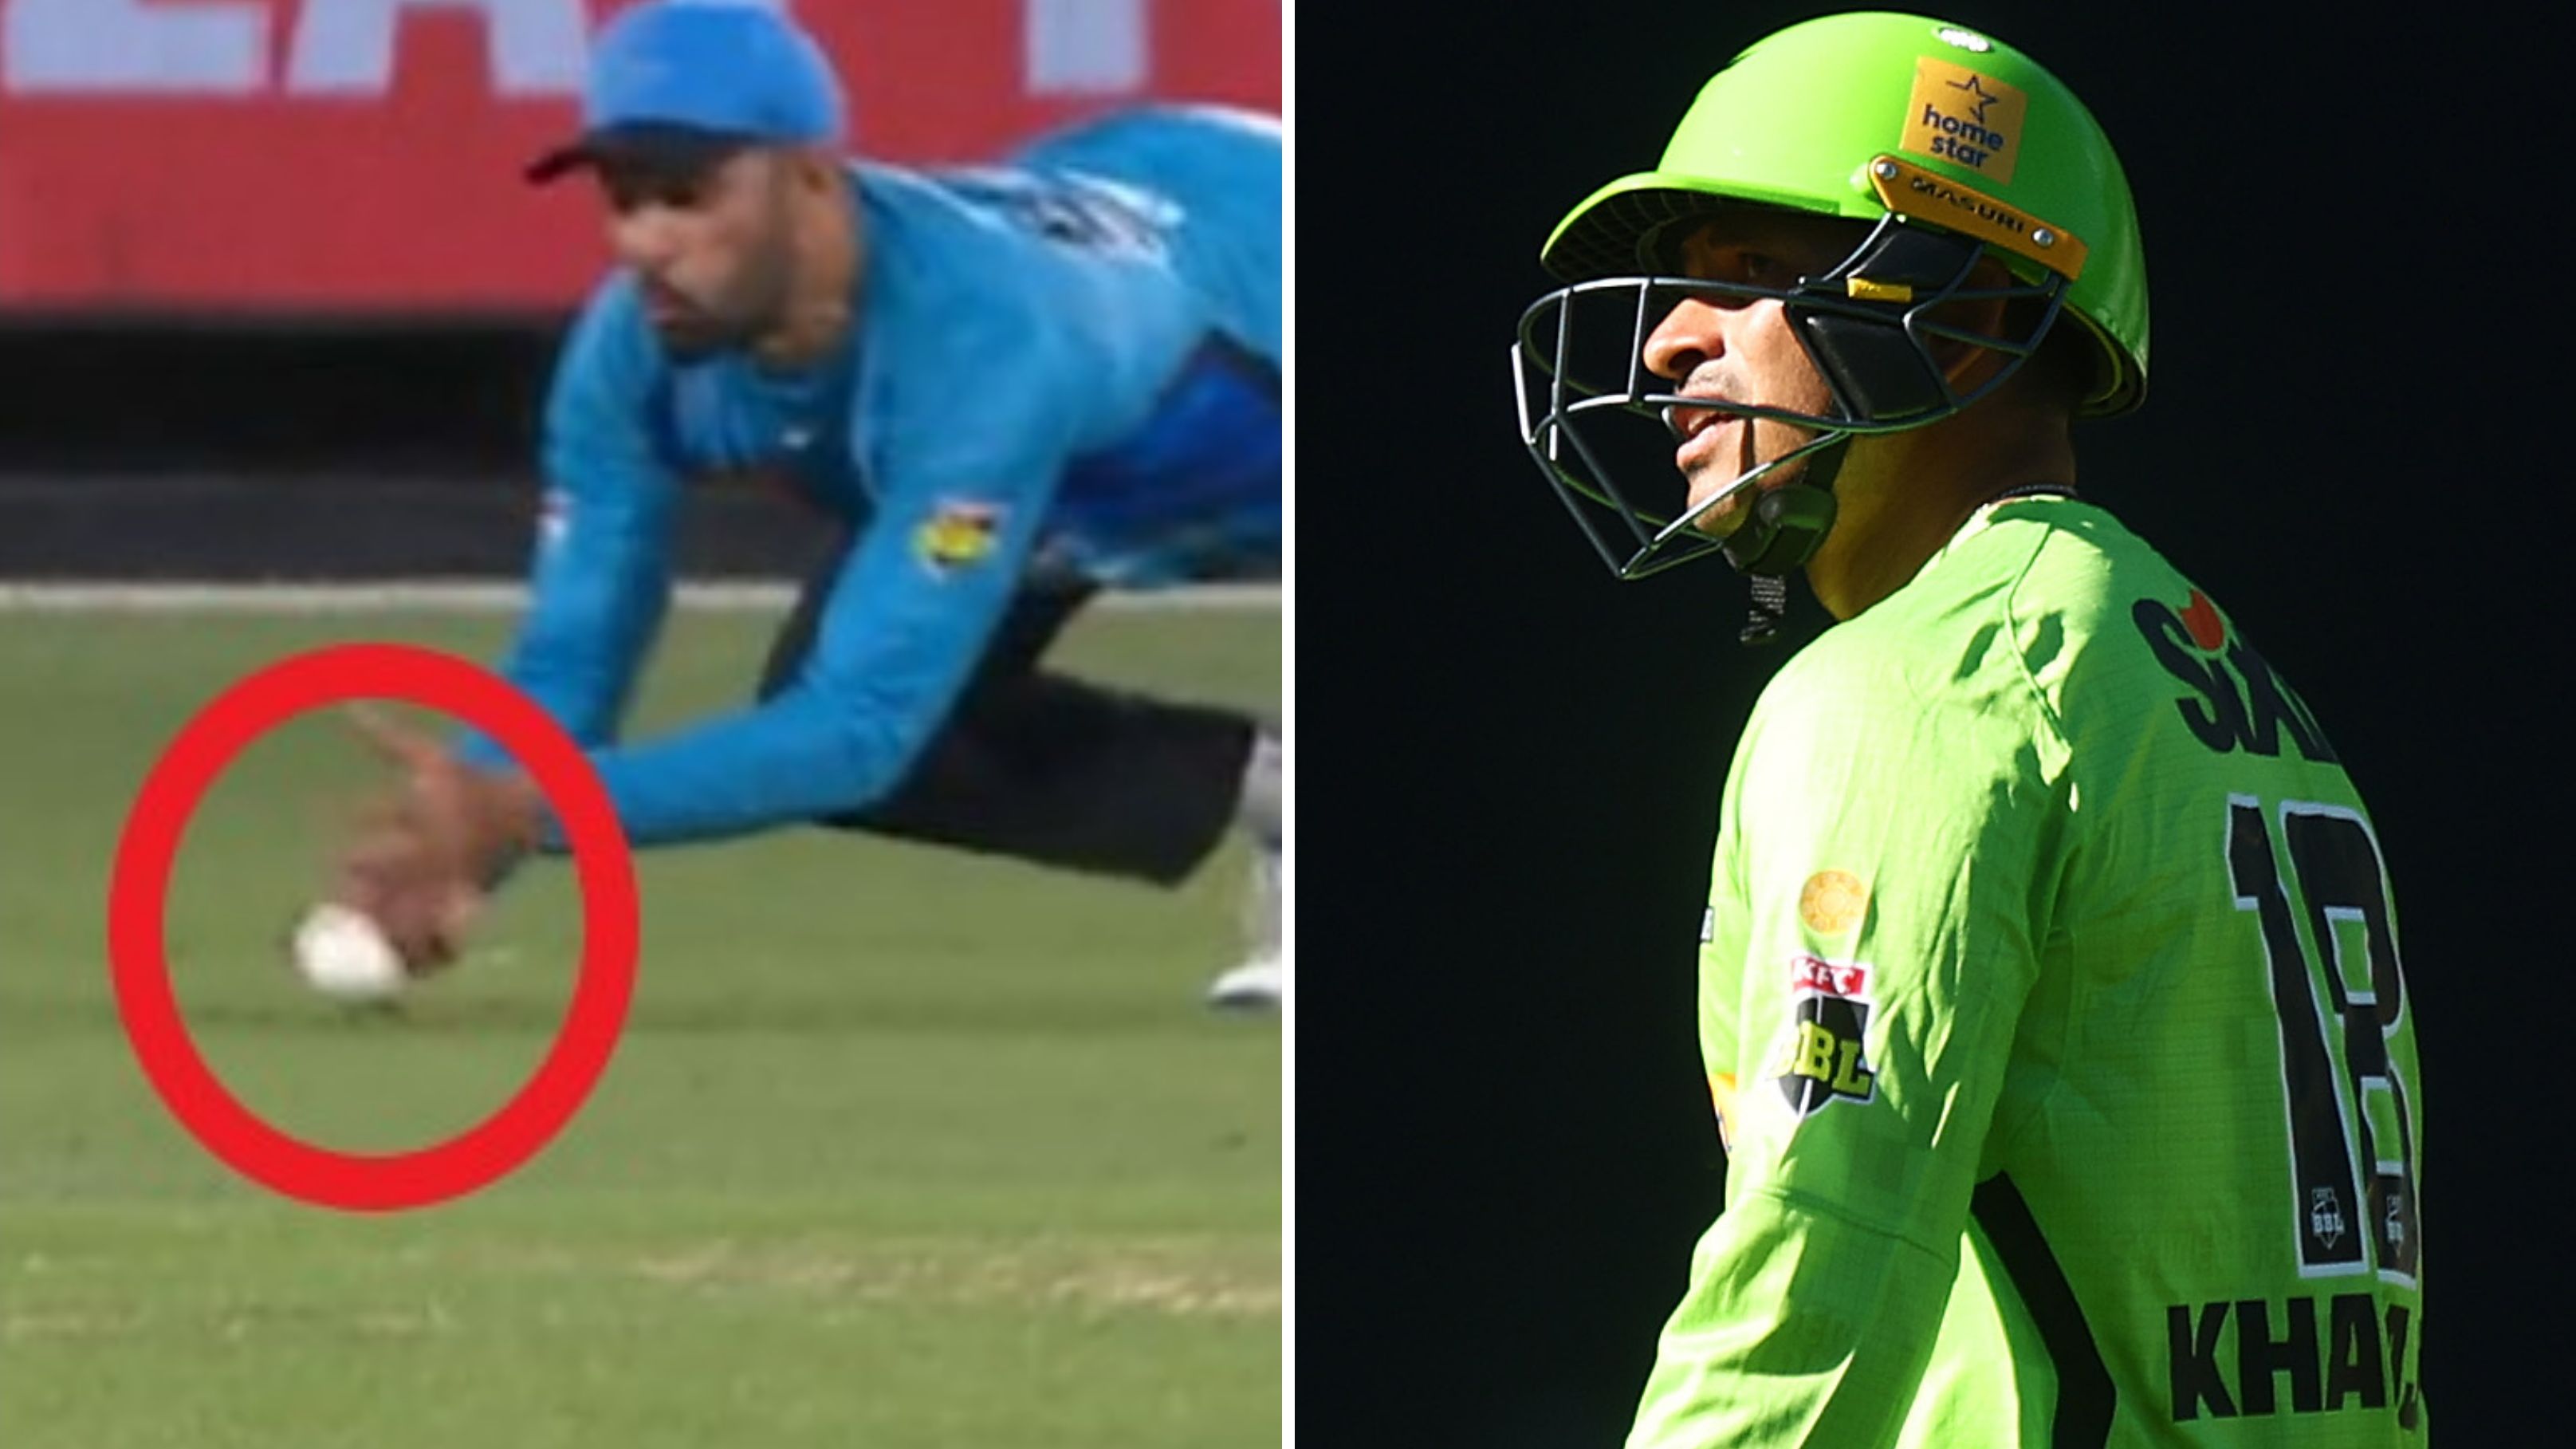 Fawad Ahmed was awarded this catch, to the ire of Usman Khawaja.